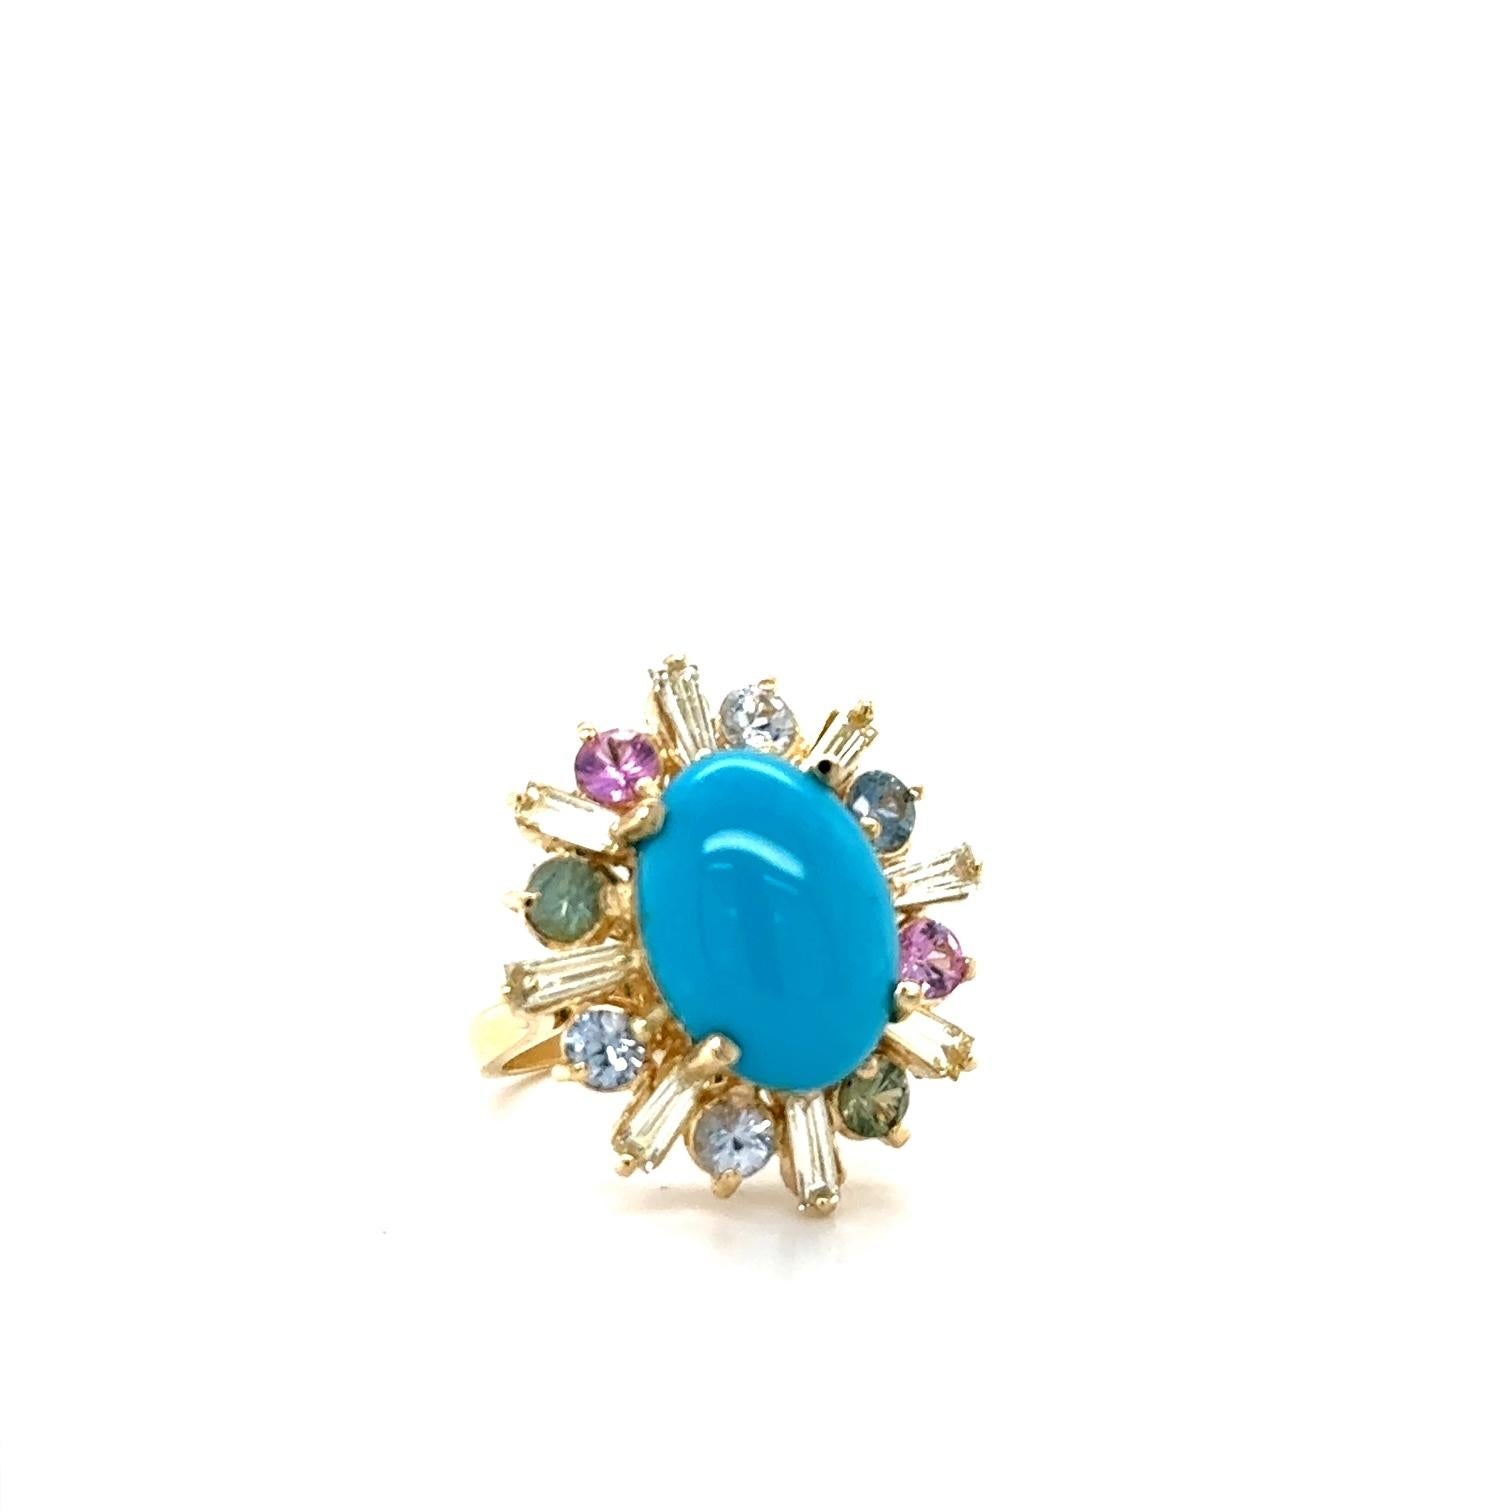 6.90 Carat Turquoise Diamond Sapphire Yellow Gold Cocktail Ring

A unique stunner.....

This ring has a 4.71 Carat Oval Cut Turquoise and is surrounded by 8 Tapered Baguette Cut Natural Diamonds that weigh 0.81 Carats and 8 Multi-Color Sapphires